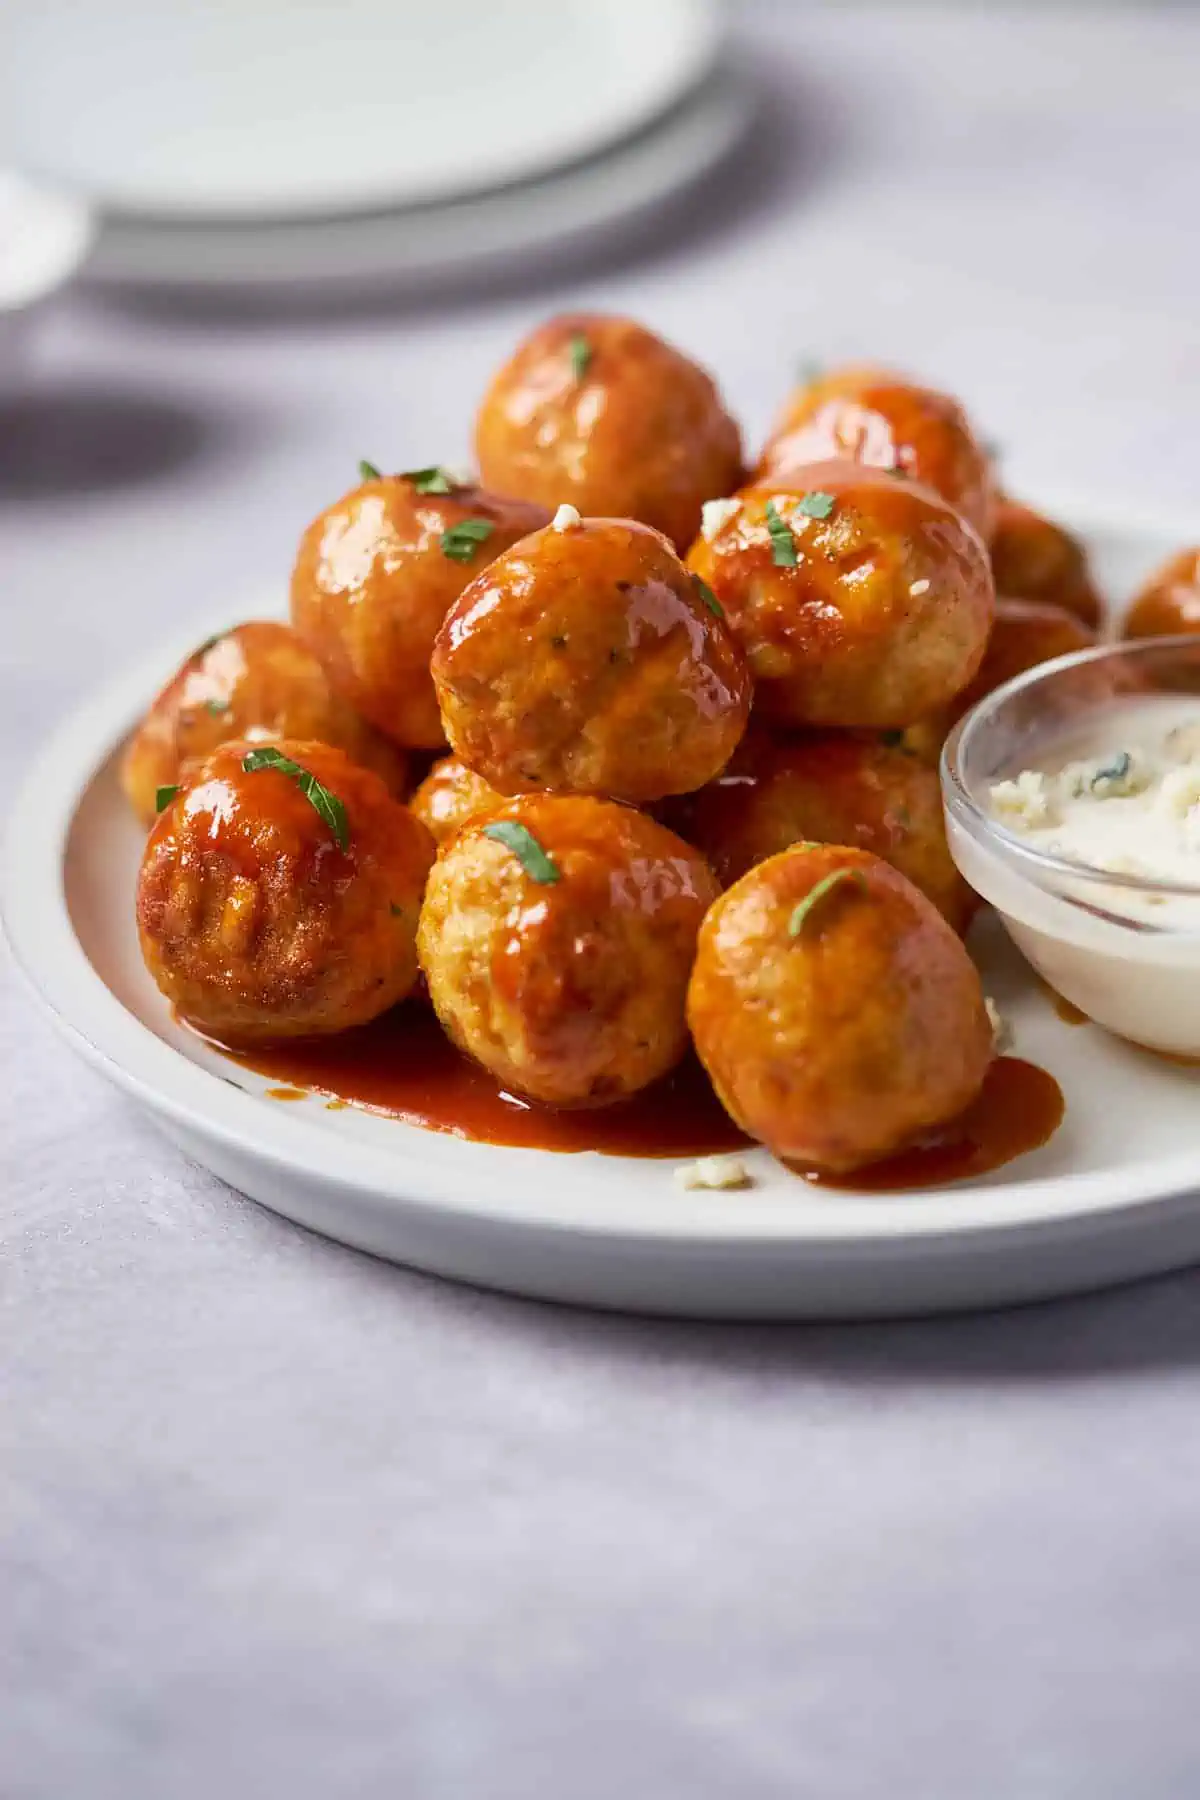 Air-fried buffalo chicken meatballs are served on a plate, sprinkled with fresh herbs, and on the side, blue cheese ranch with crumbled blue cheese on top.